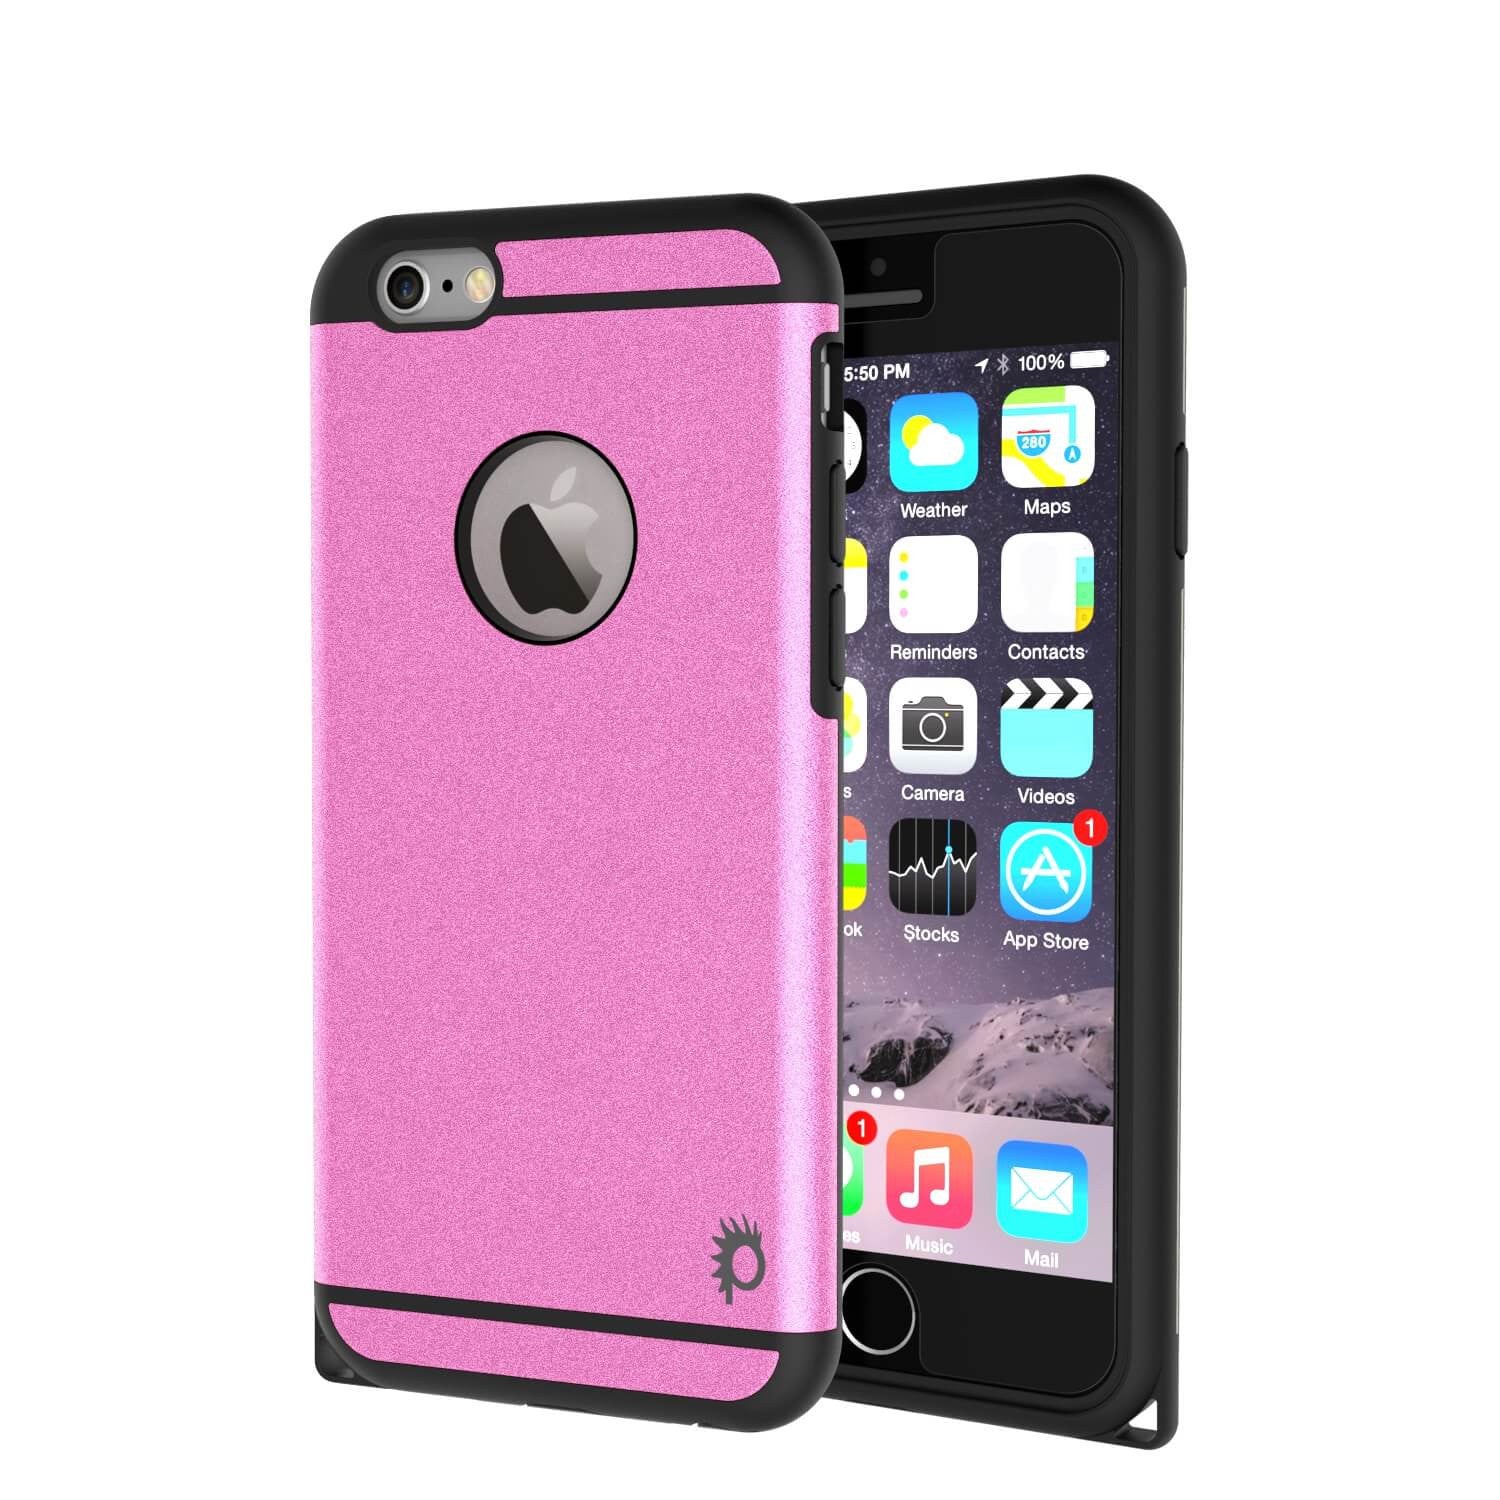 iPhone 6s Plus/6 Plus Case PunkCase Galactic Pink Slim w/ Tempered Glass Protector Lifetime Warranty (Color in image: pink)